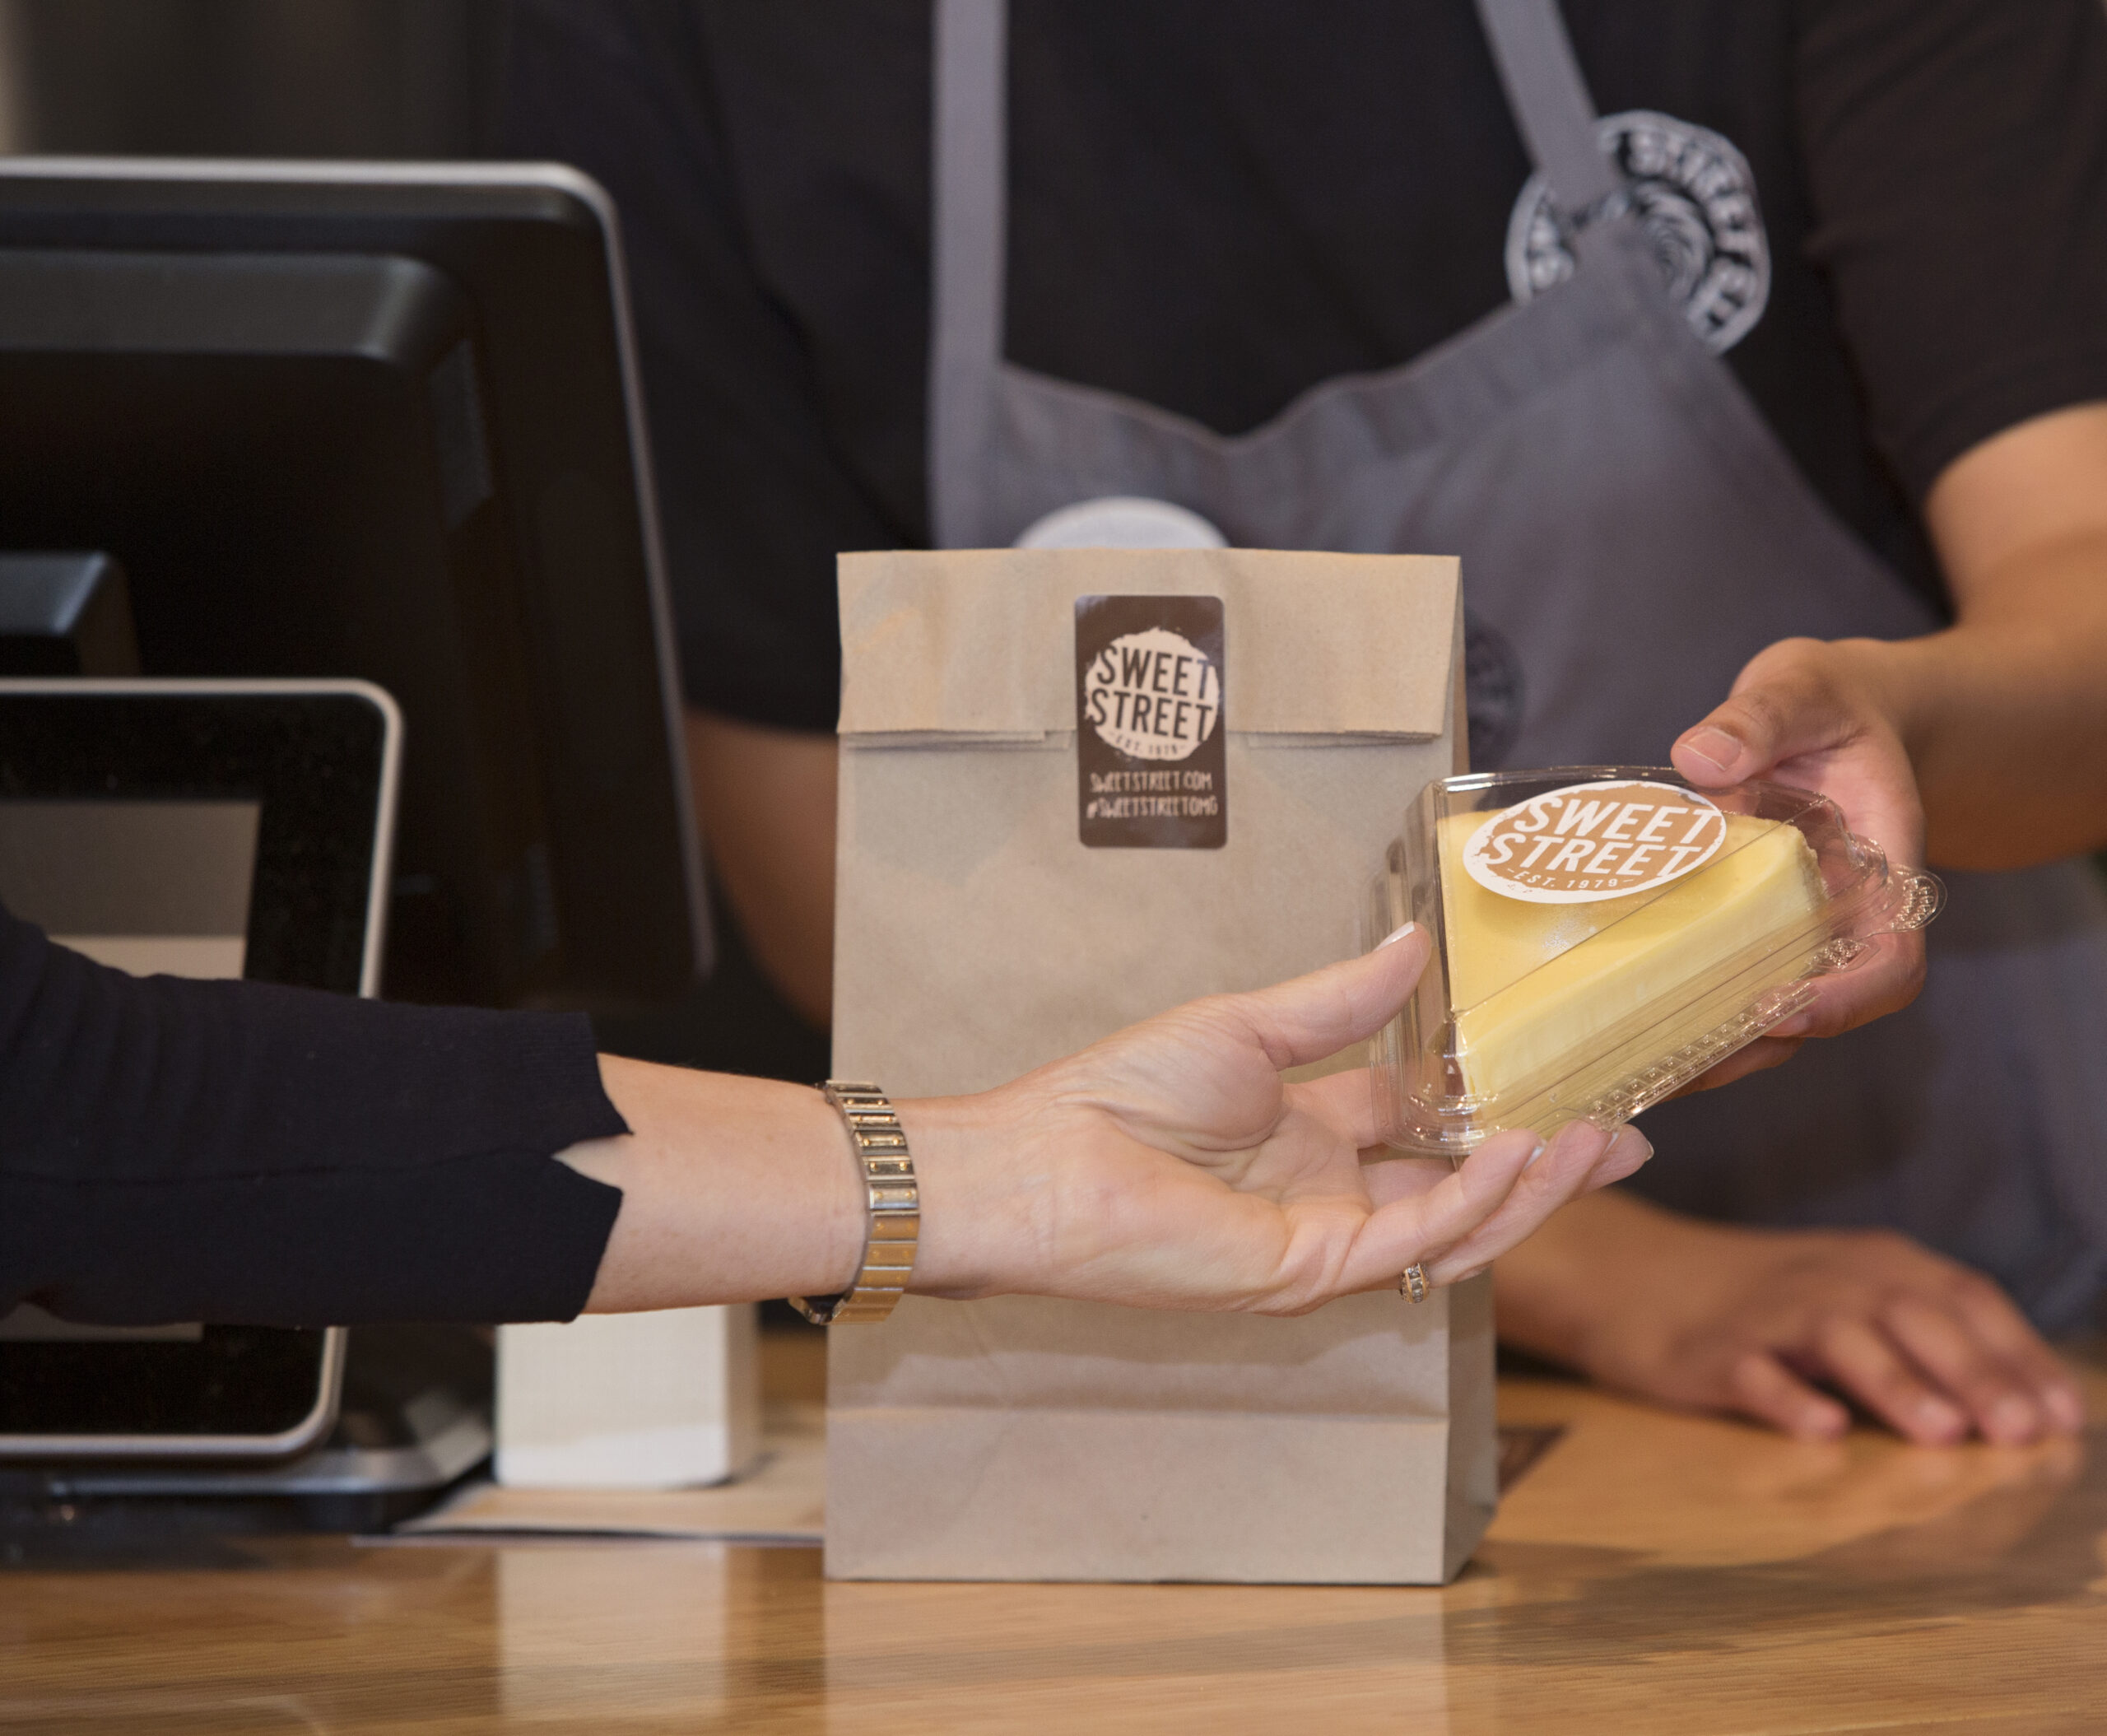 Bundles, proper packaging are key to driving dessert orders for off-premise